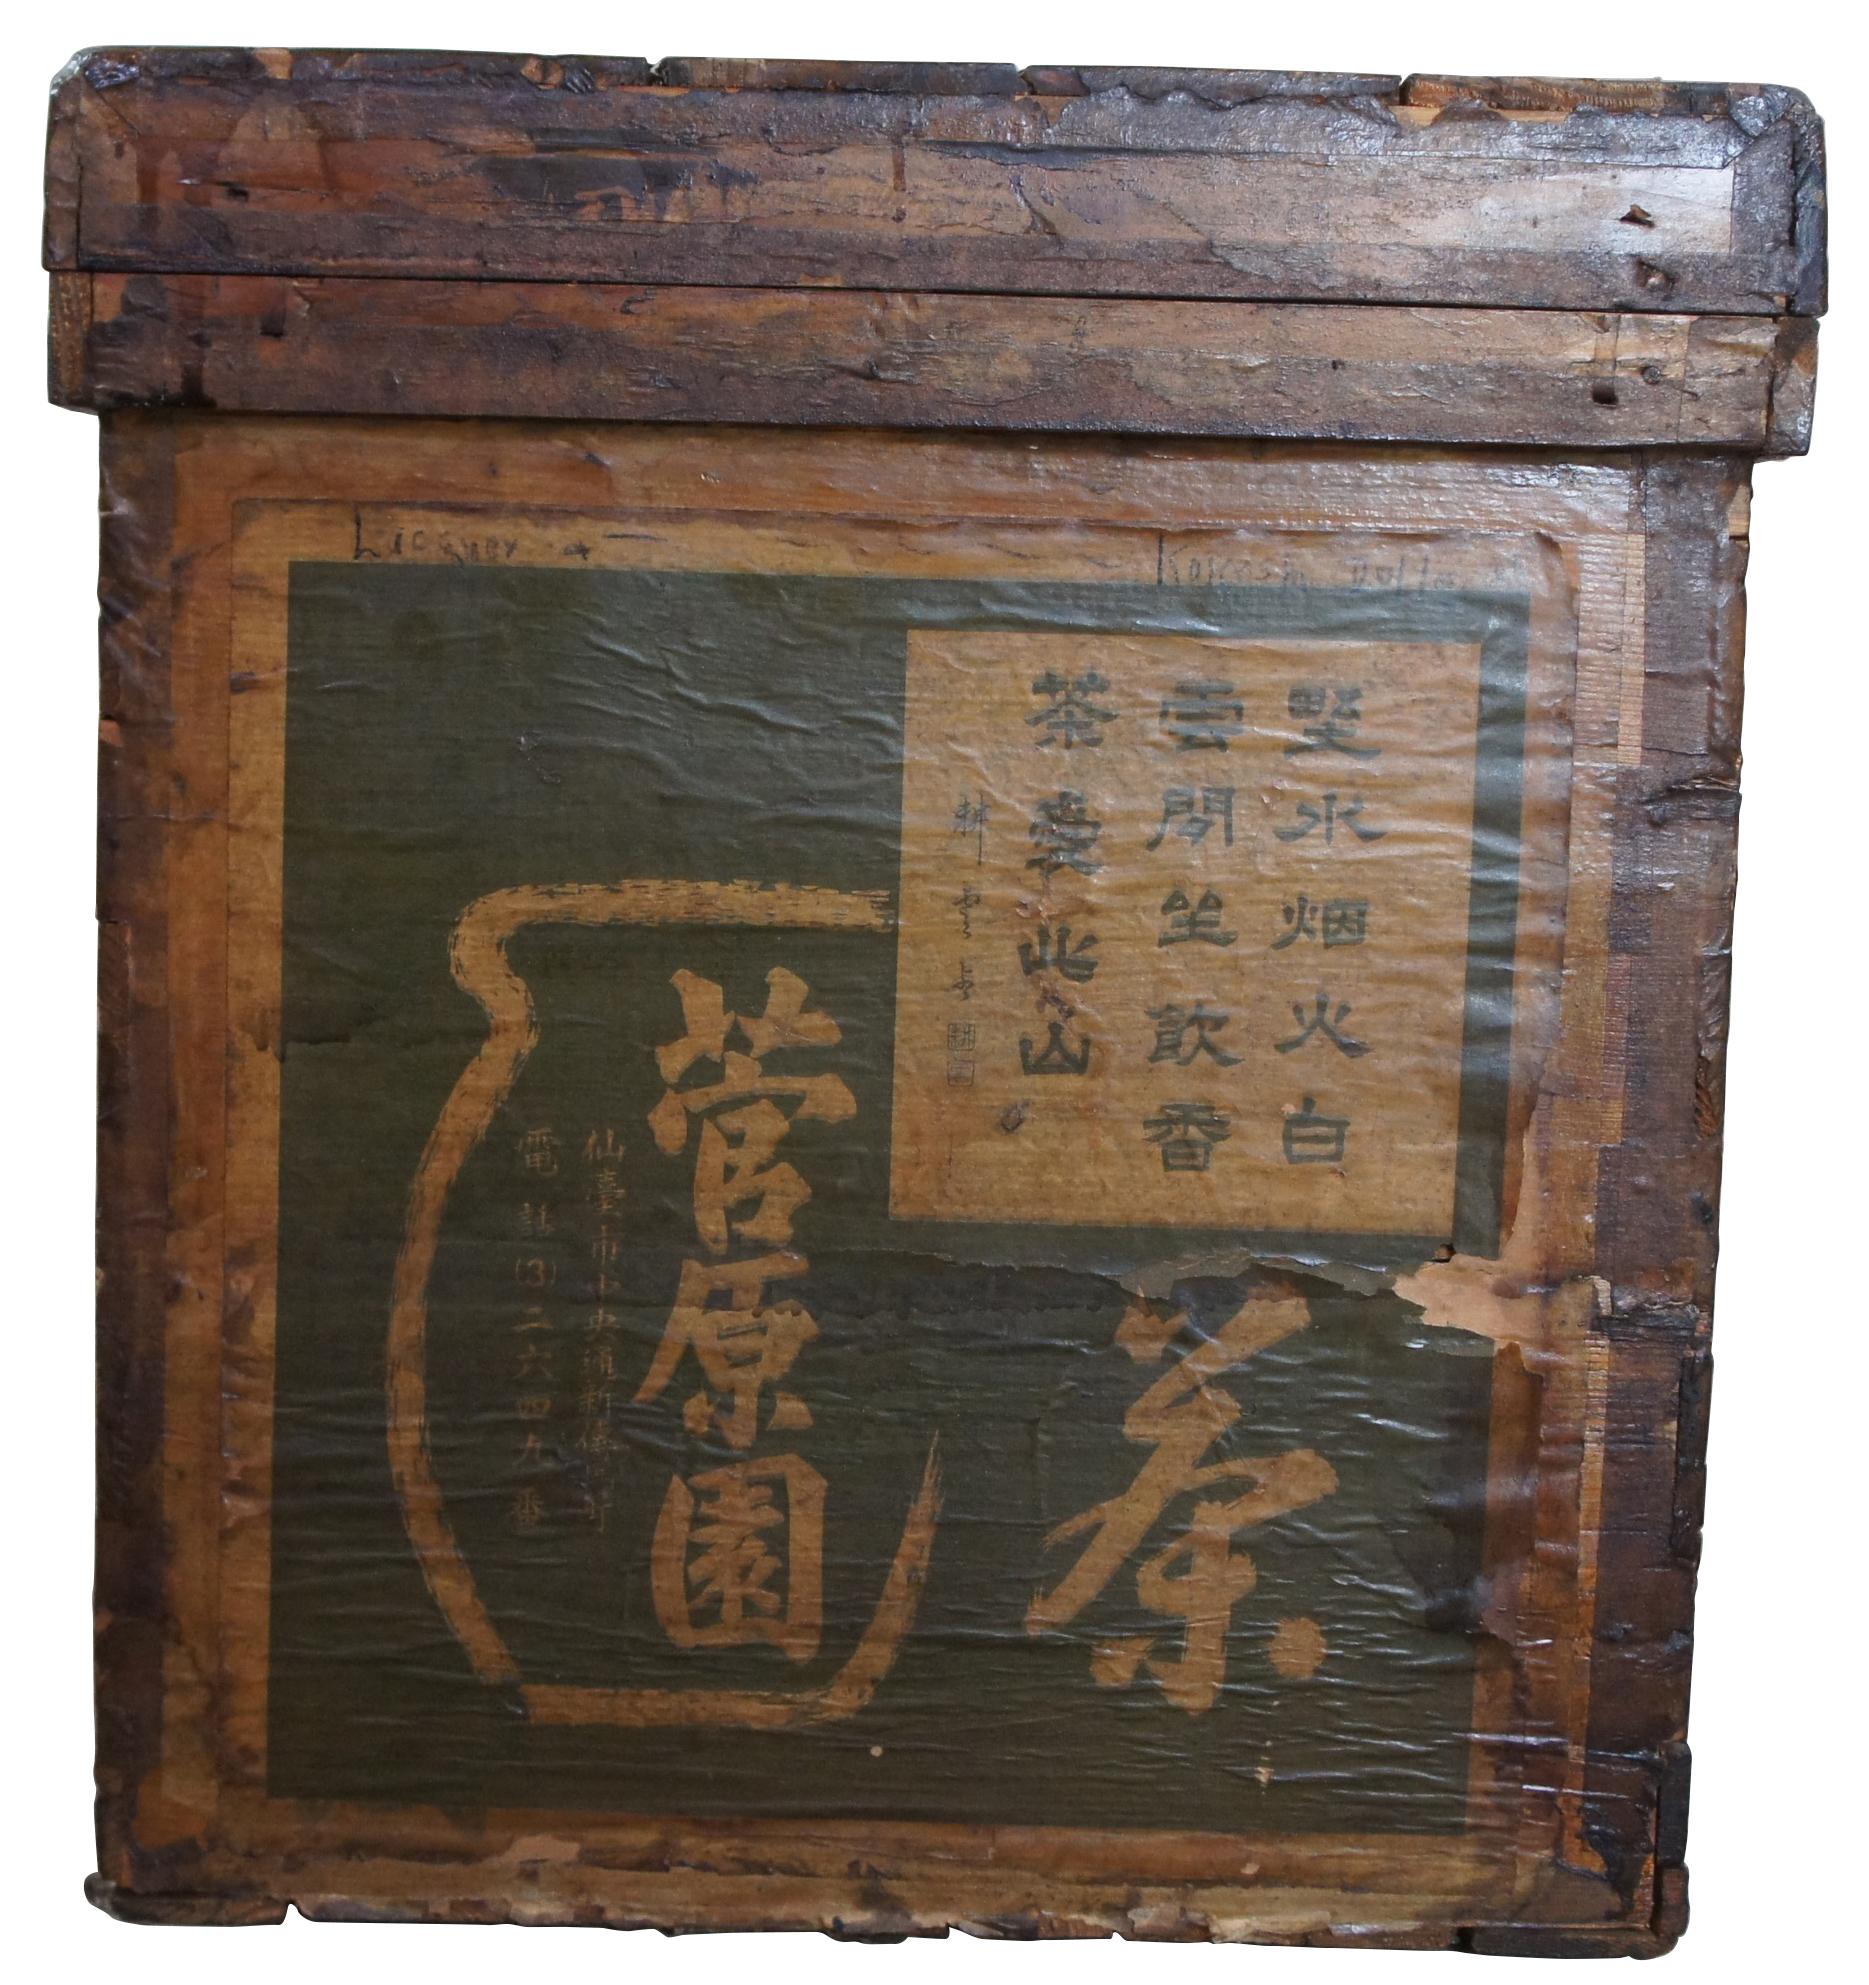 Antique tea shipping crate. Made from wood with paper labeling and tin lining. Measure: 26